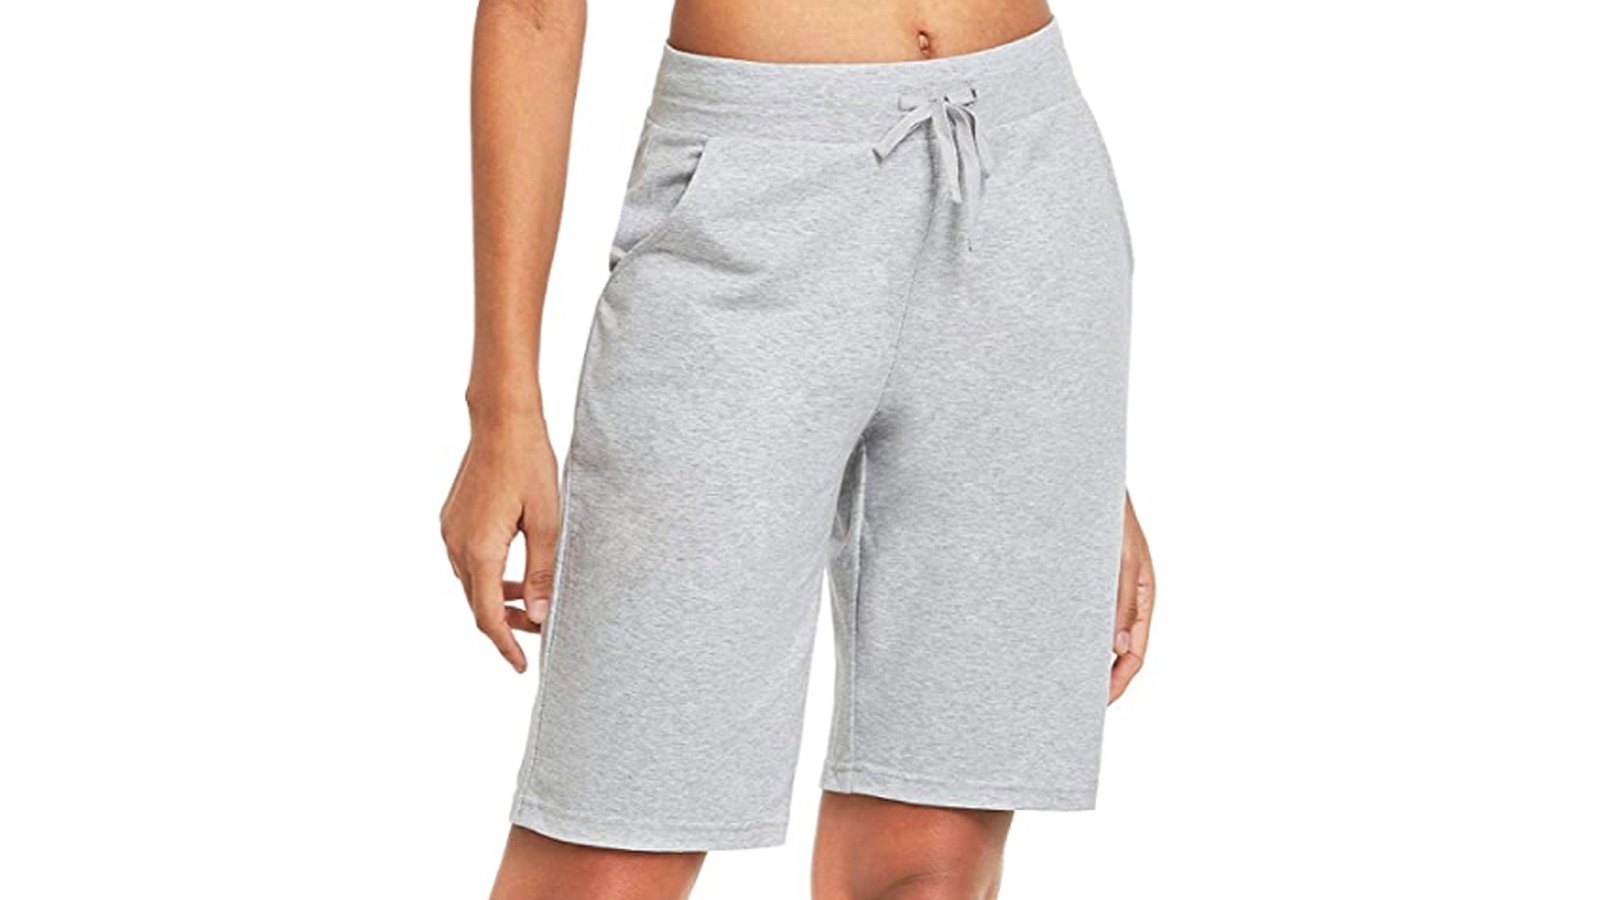 BALEAF Short Sweats Are the Perfect Casual Lounge Shorts